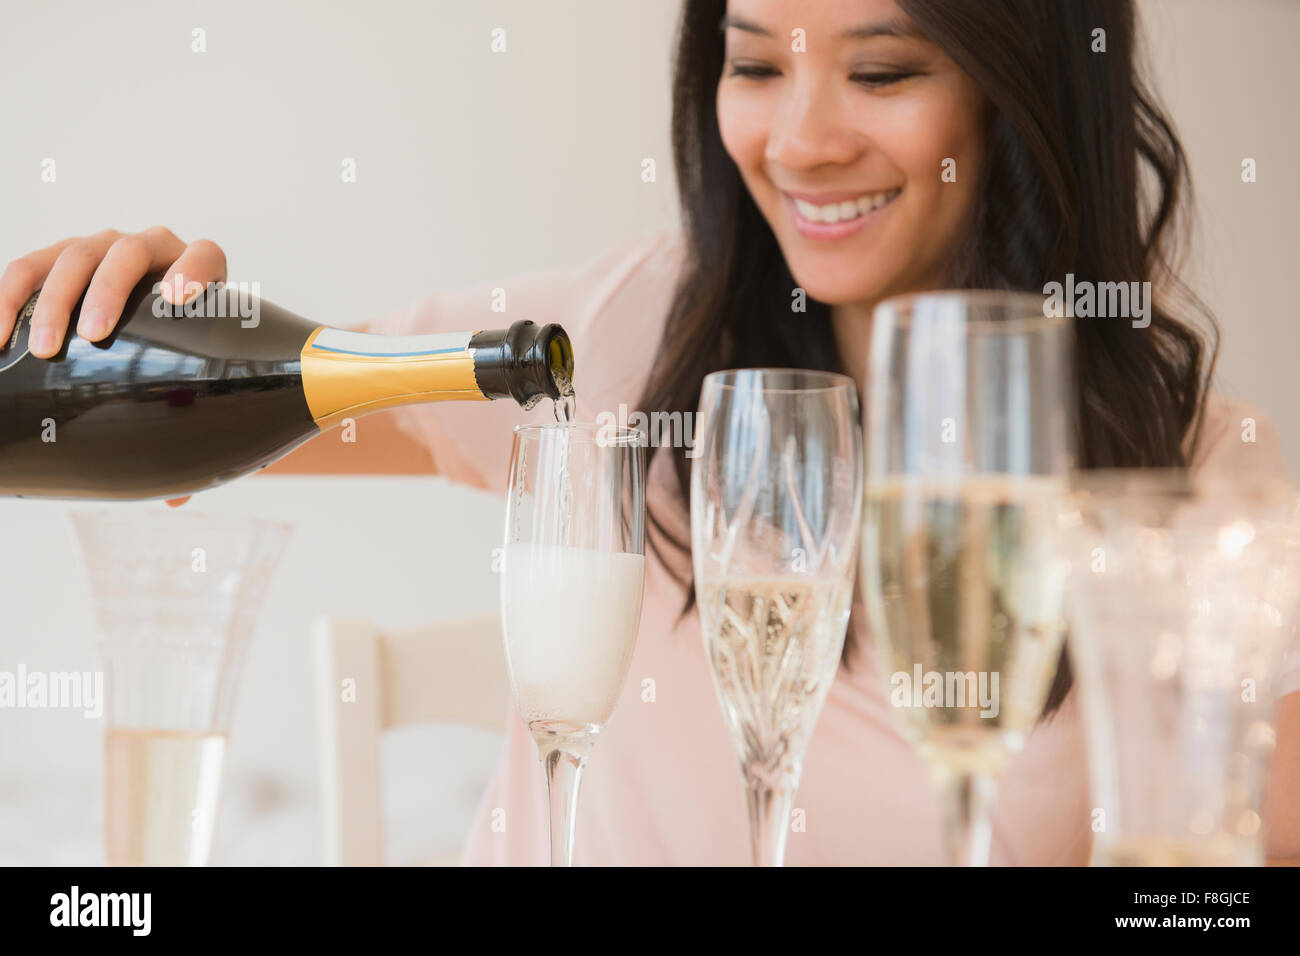 Chinese woman pouring champagne Stock Photo